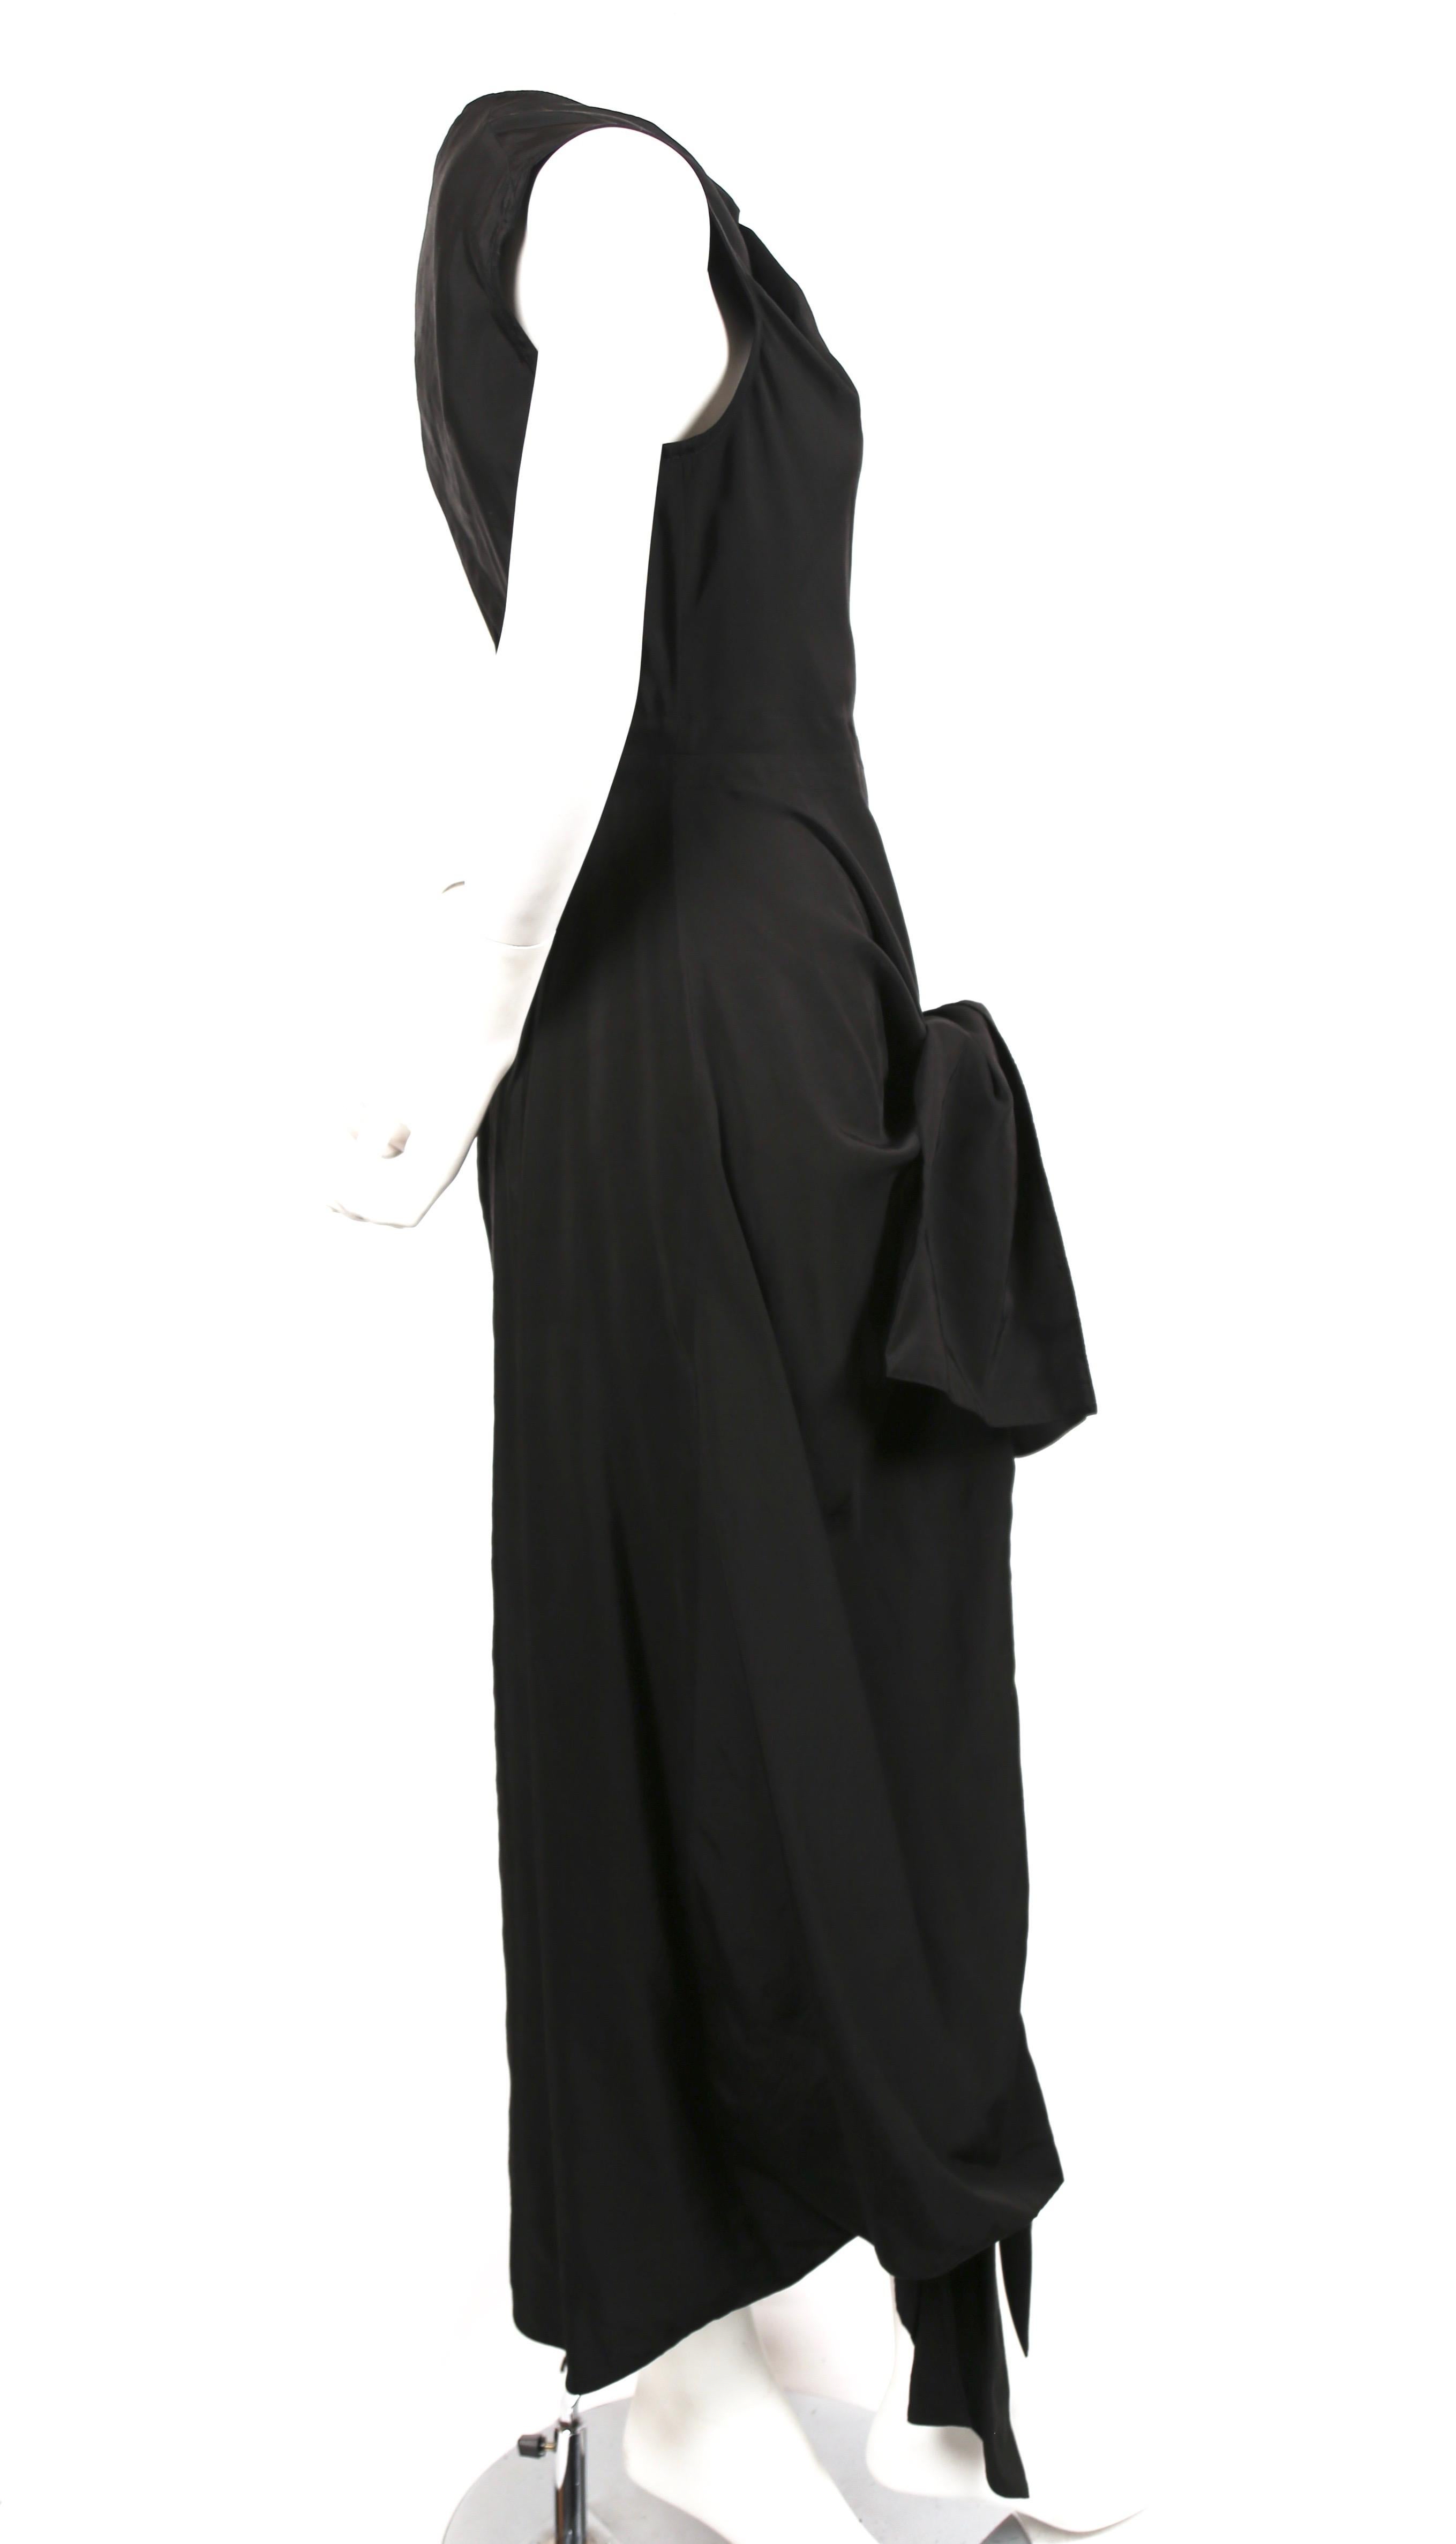 new CELINE By PHOEBE PHILO black dress with ties and cut out back For Sale 1